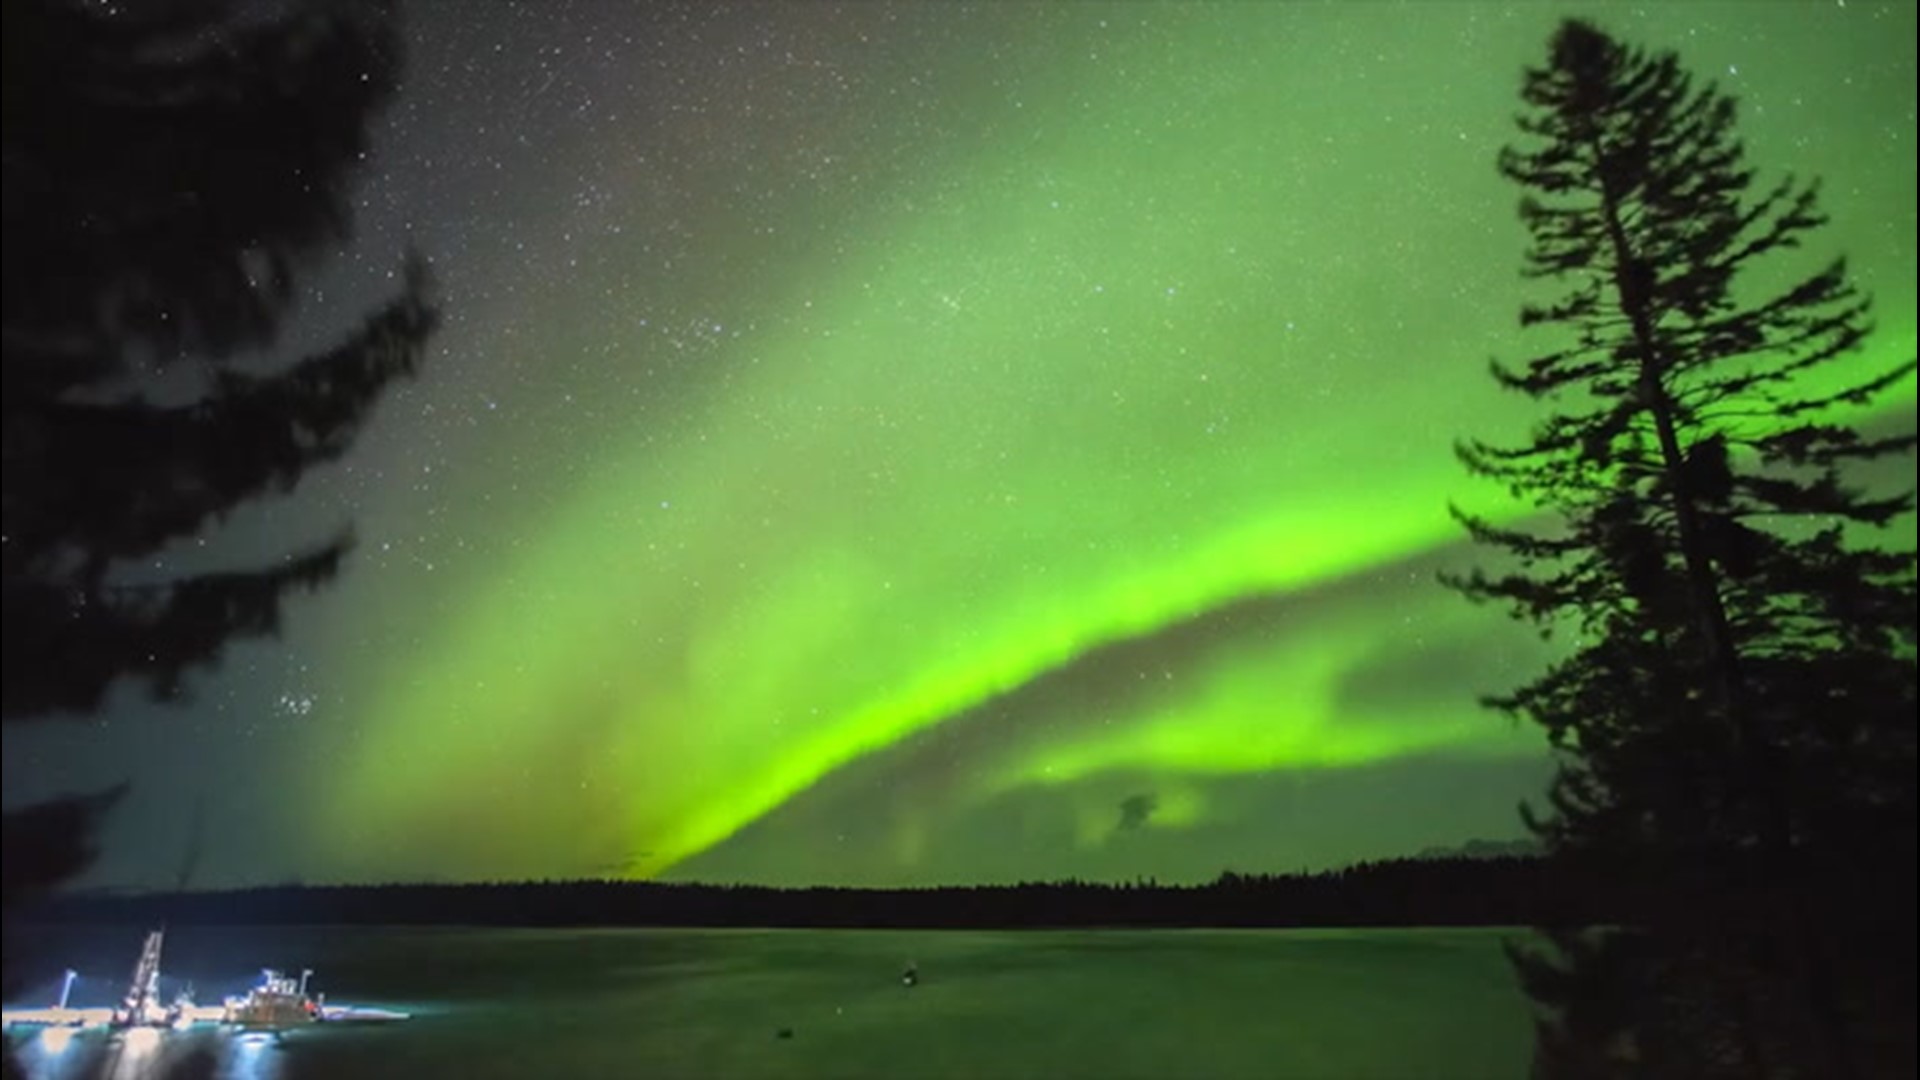 A time-lapse video recorded at Alaska's Glacier Bay National Park on March 12, when the sky was remarkably clear, shows the green waves of the aurora borealis lighting up the night sky over Bartlett Cove.